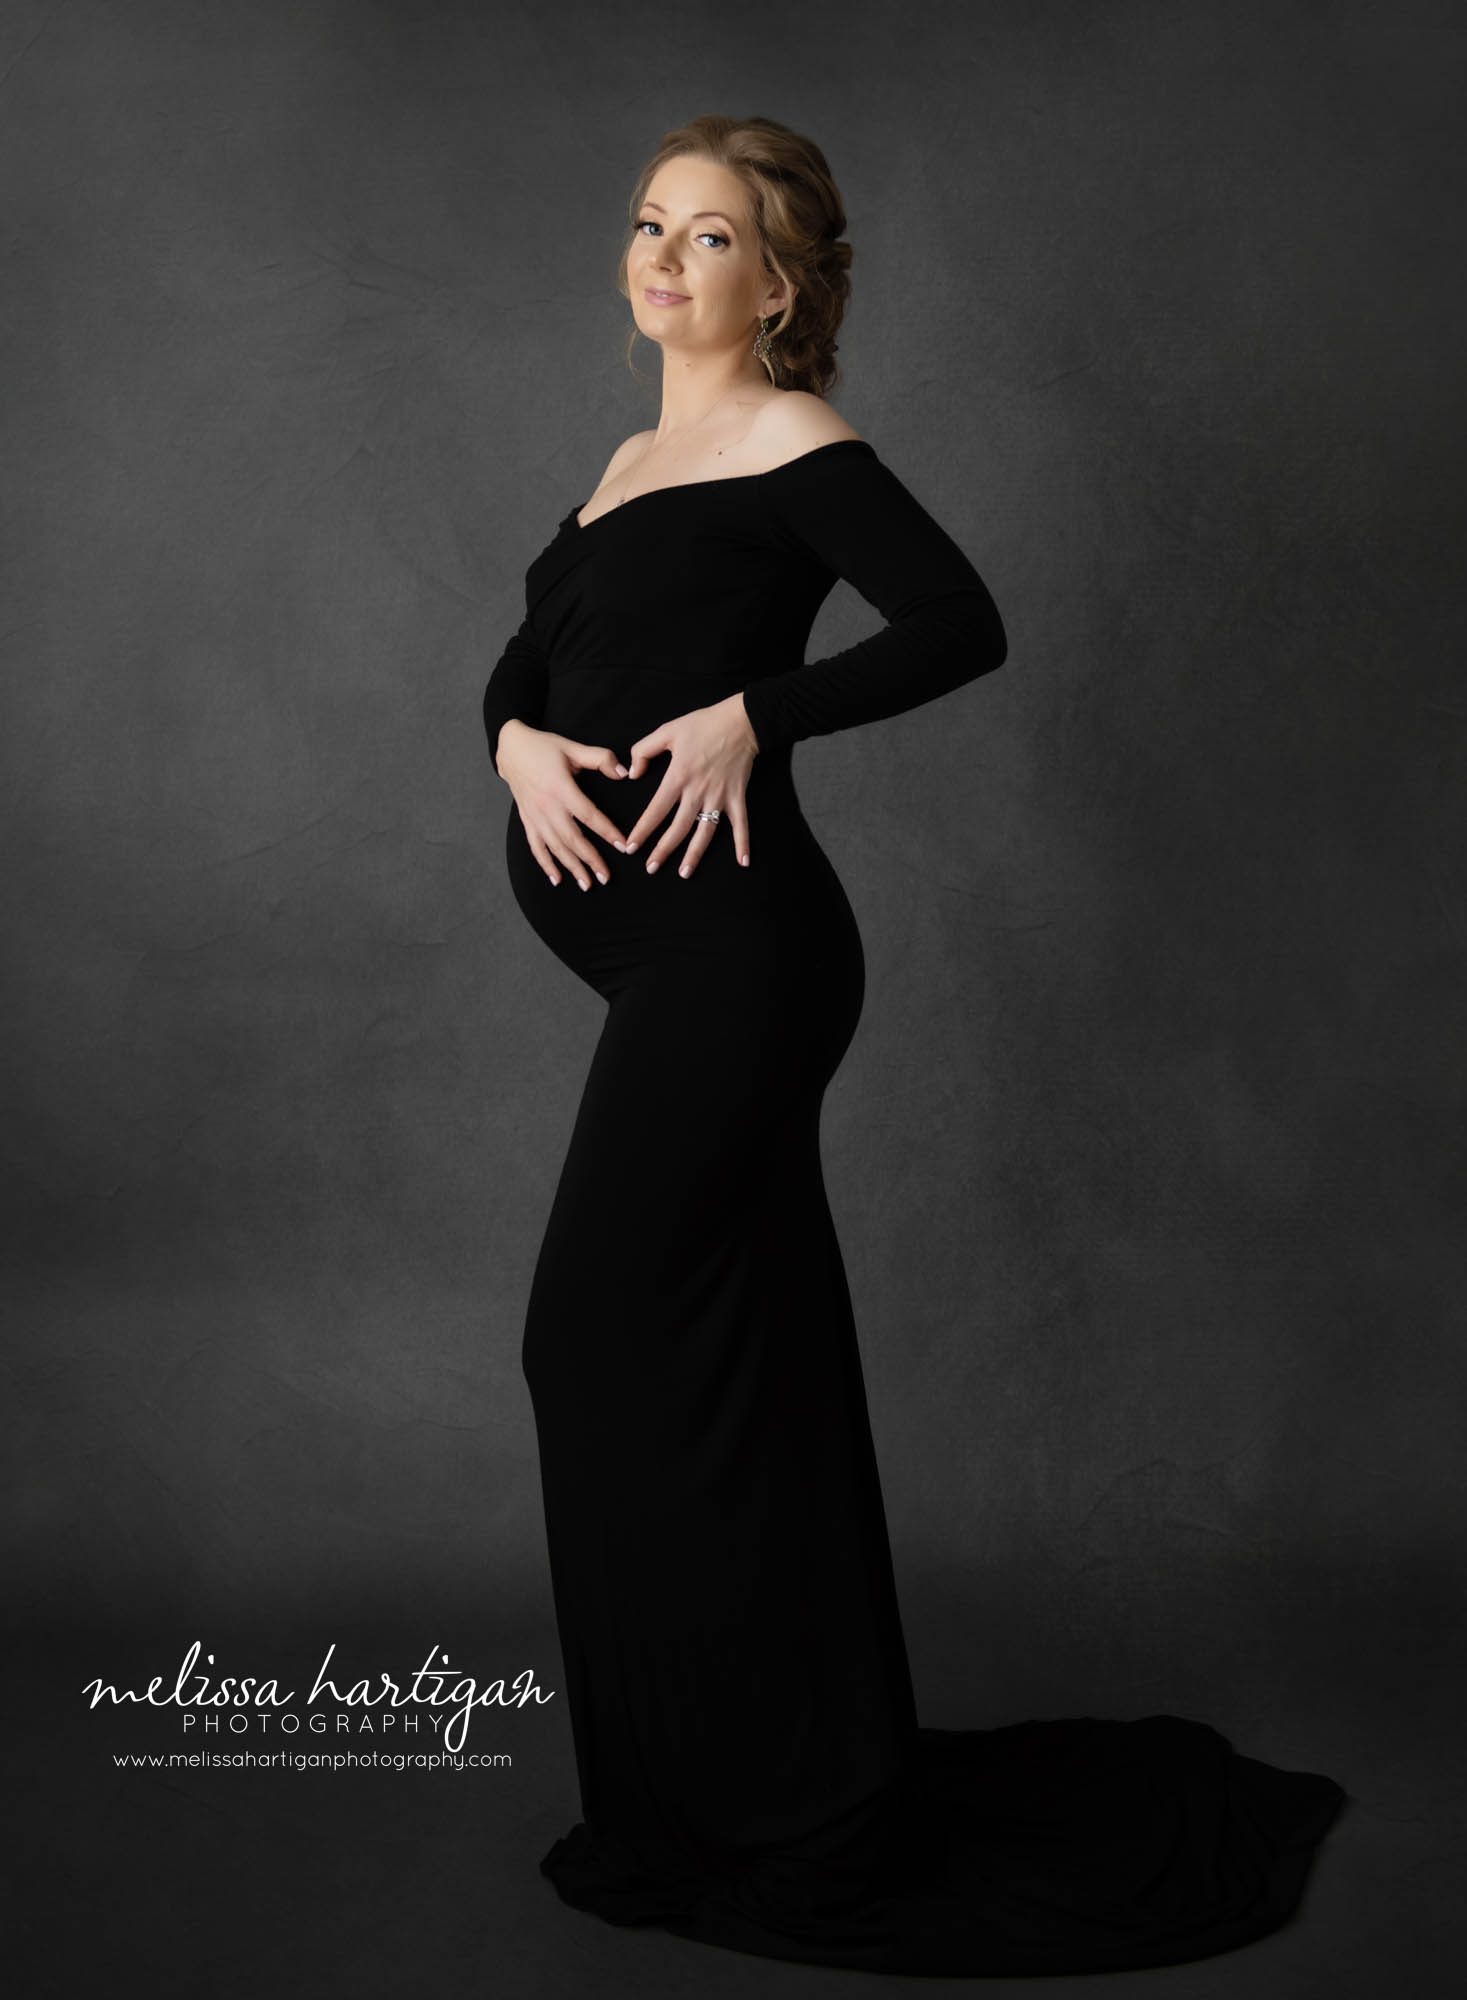 mom to be hands on belly making hear with hands smiling west hartford pregnancy photographer